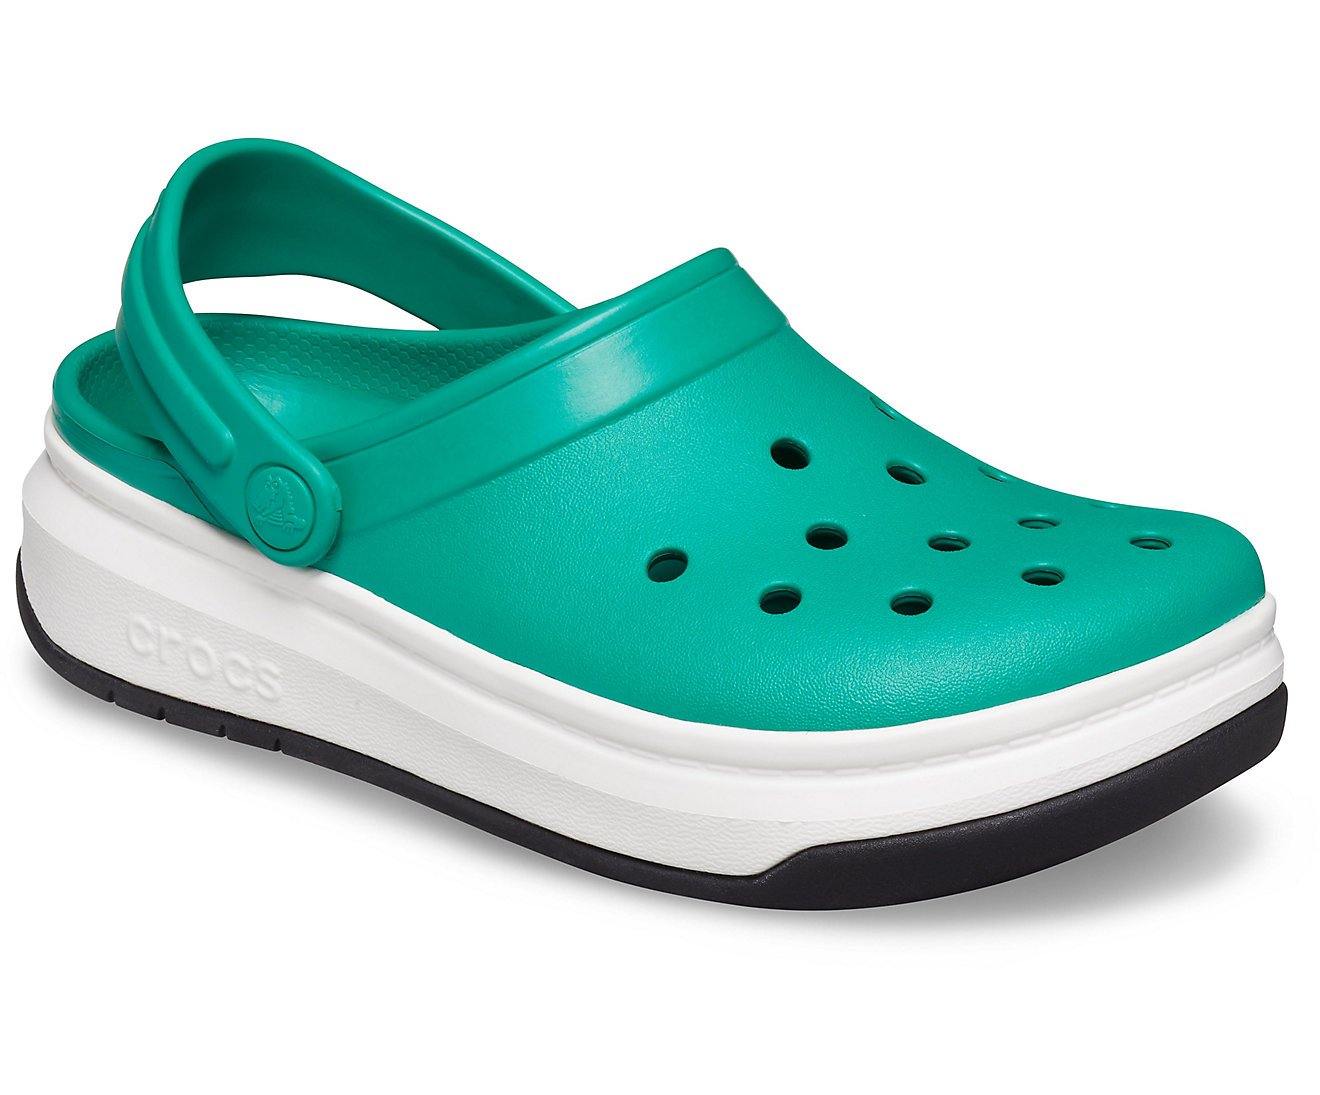 Authentic Crocband Full Force Clog - Deep Green/ White